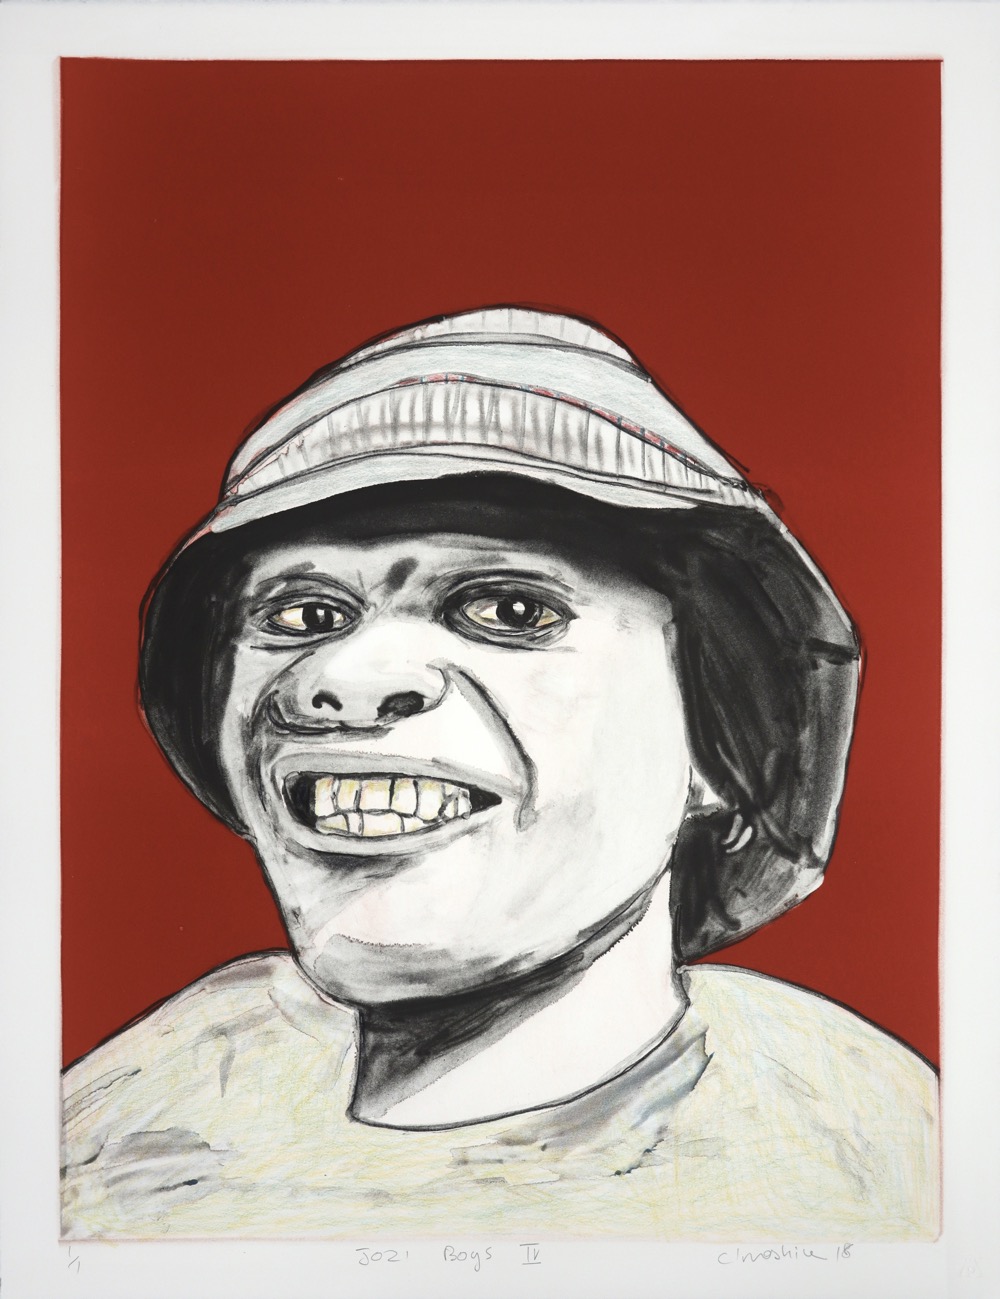 Smiling young man in bucket hat looking directly at the viewer.